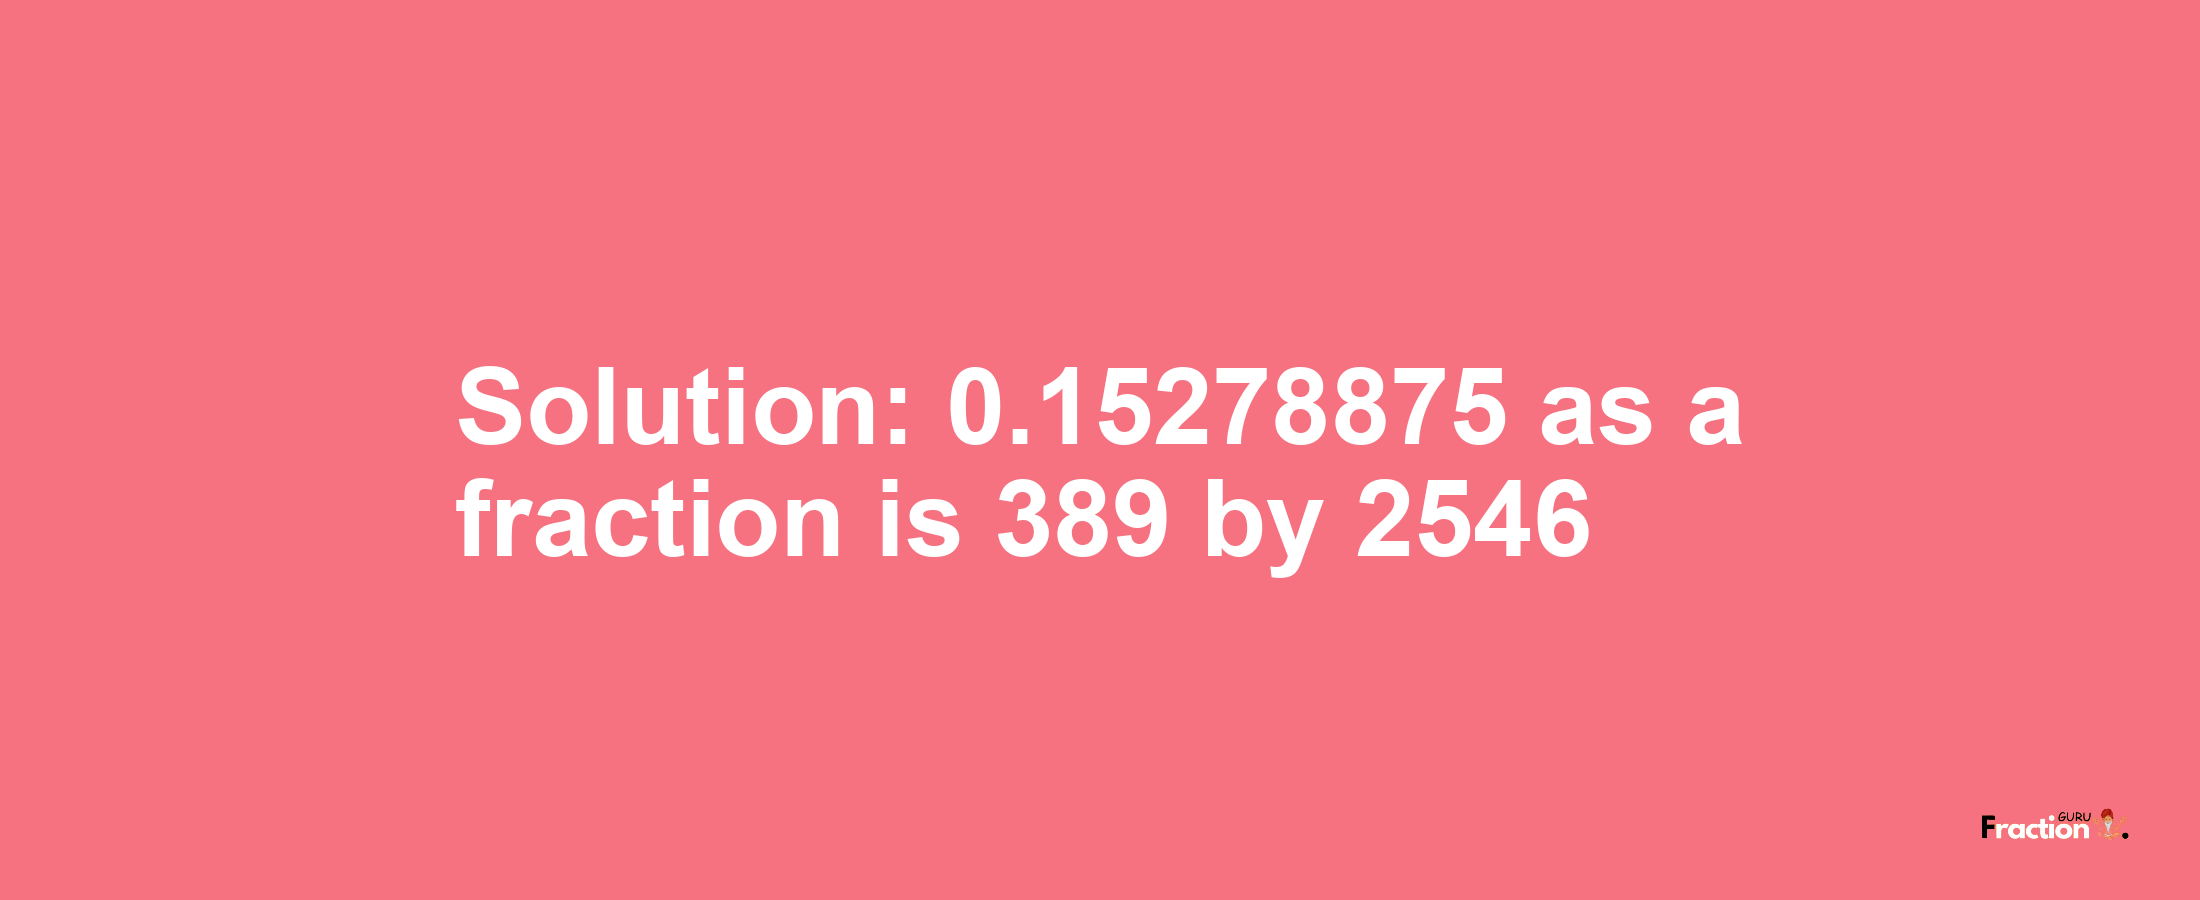 Solution:0.15278875 as a fraction is 389/2546